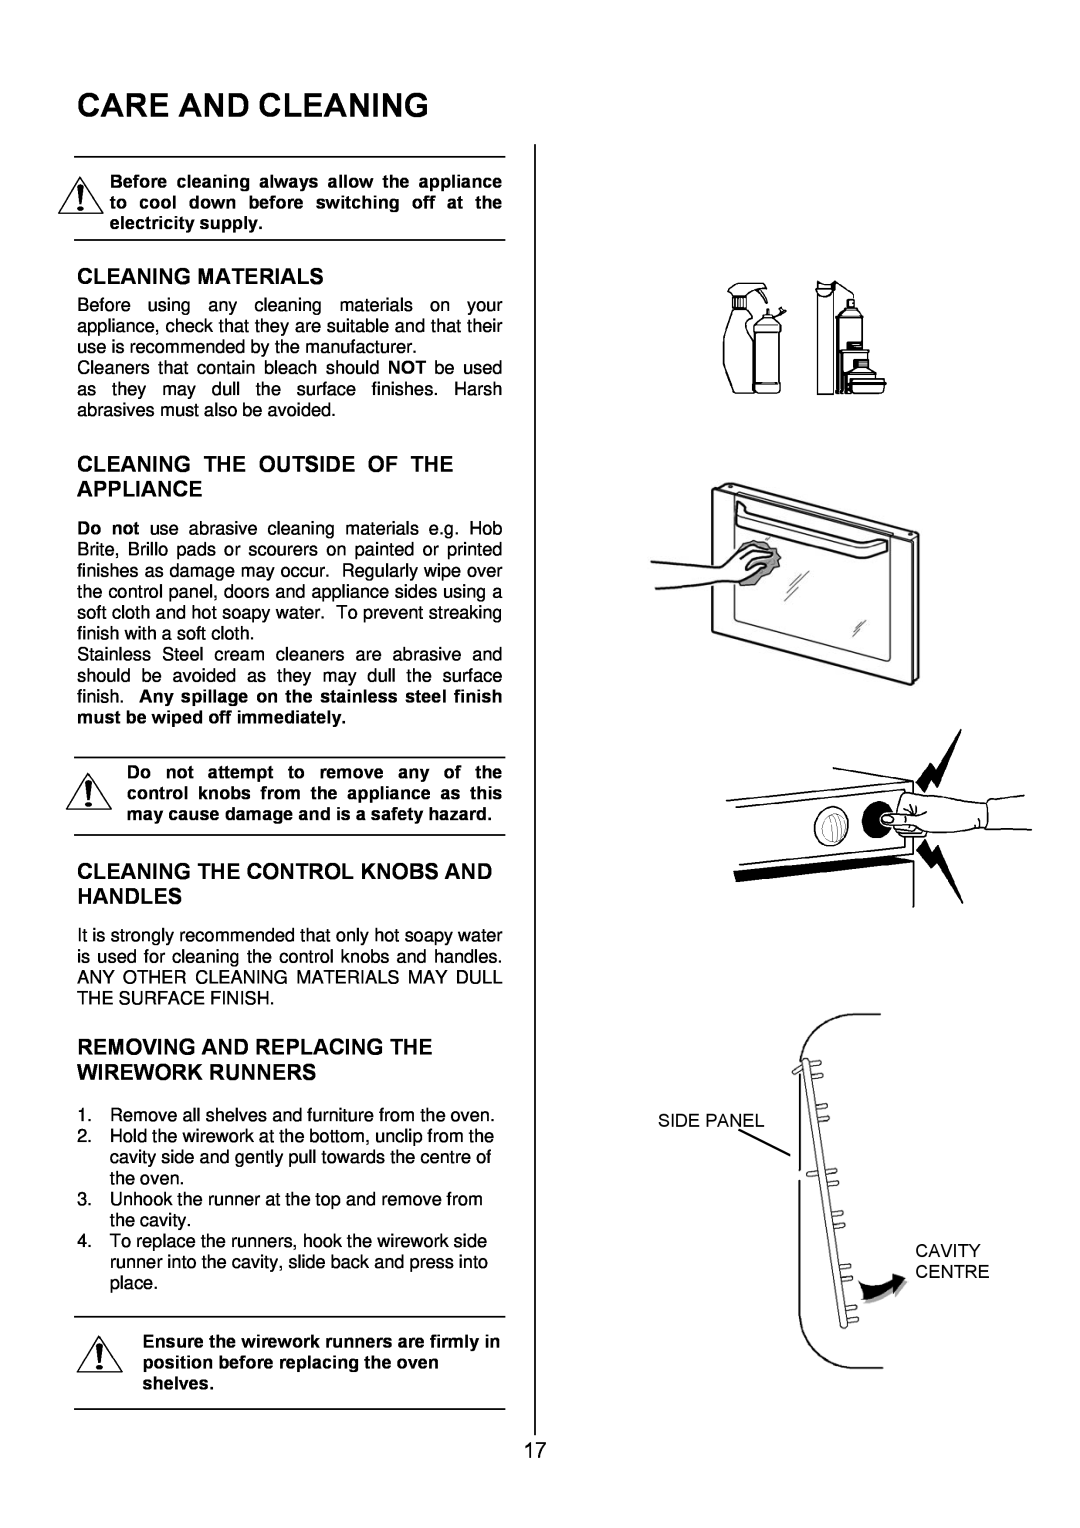 Electrolux EKG5542, EKG5543 manual Care And Cleaning, Cleaning Materials, Cleaning The Outside Of The Appliance 